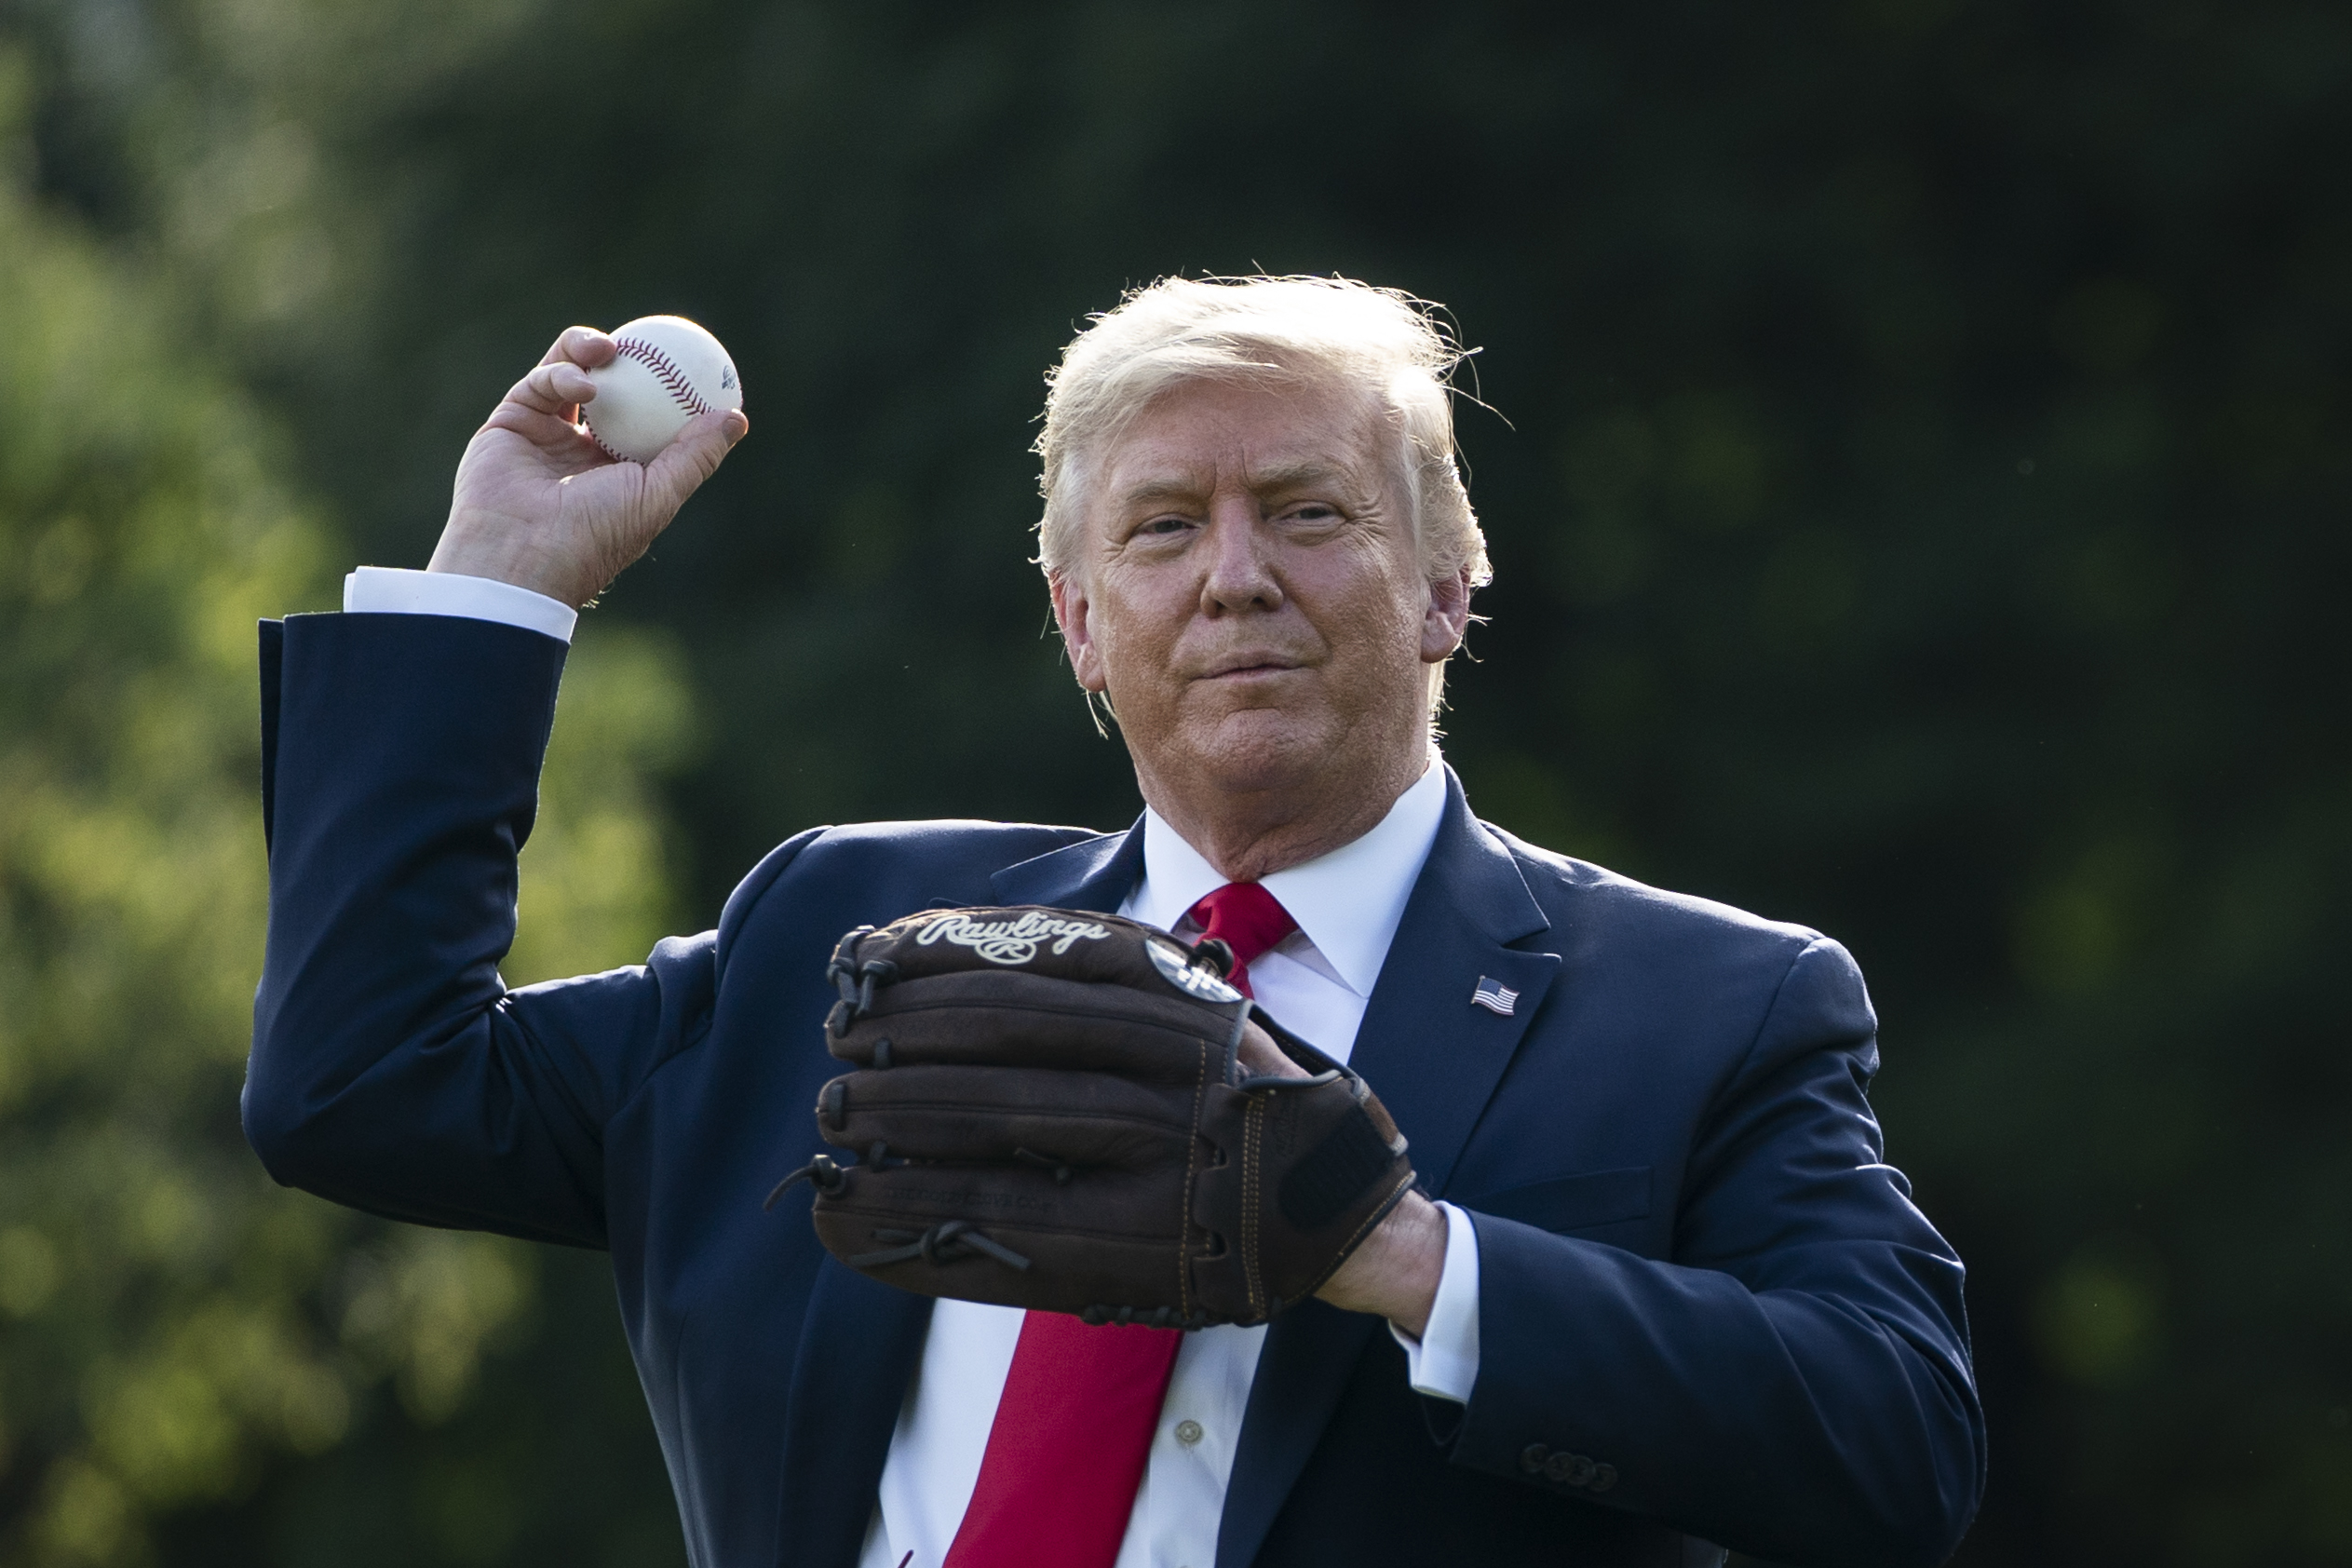 U.S. President Donald Trump with Mariano Rivera, the MLB Hall of Fame  Closer from the Yankees, watch young players to mark the Opening Day of the Major  League Baseball Season on the